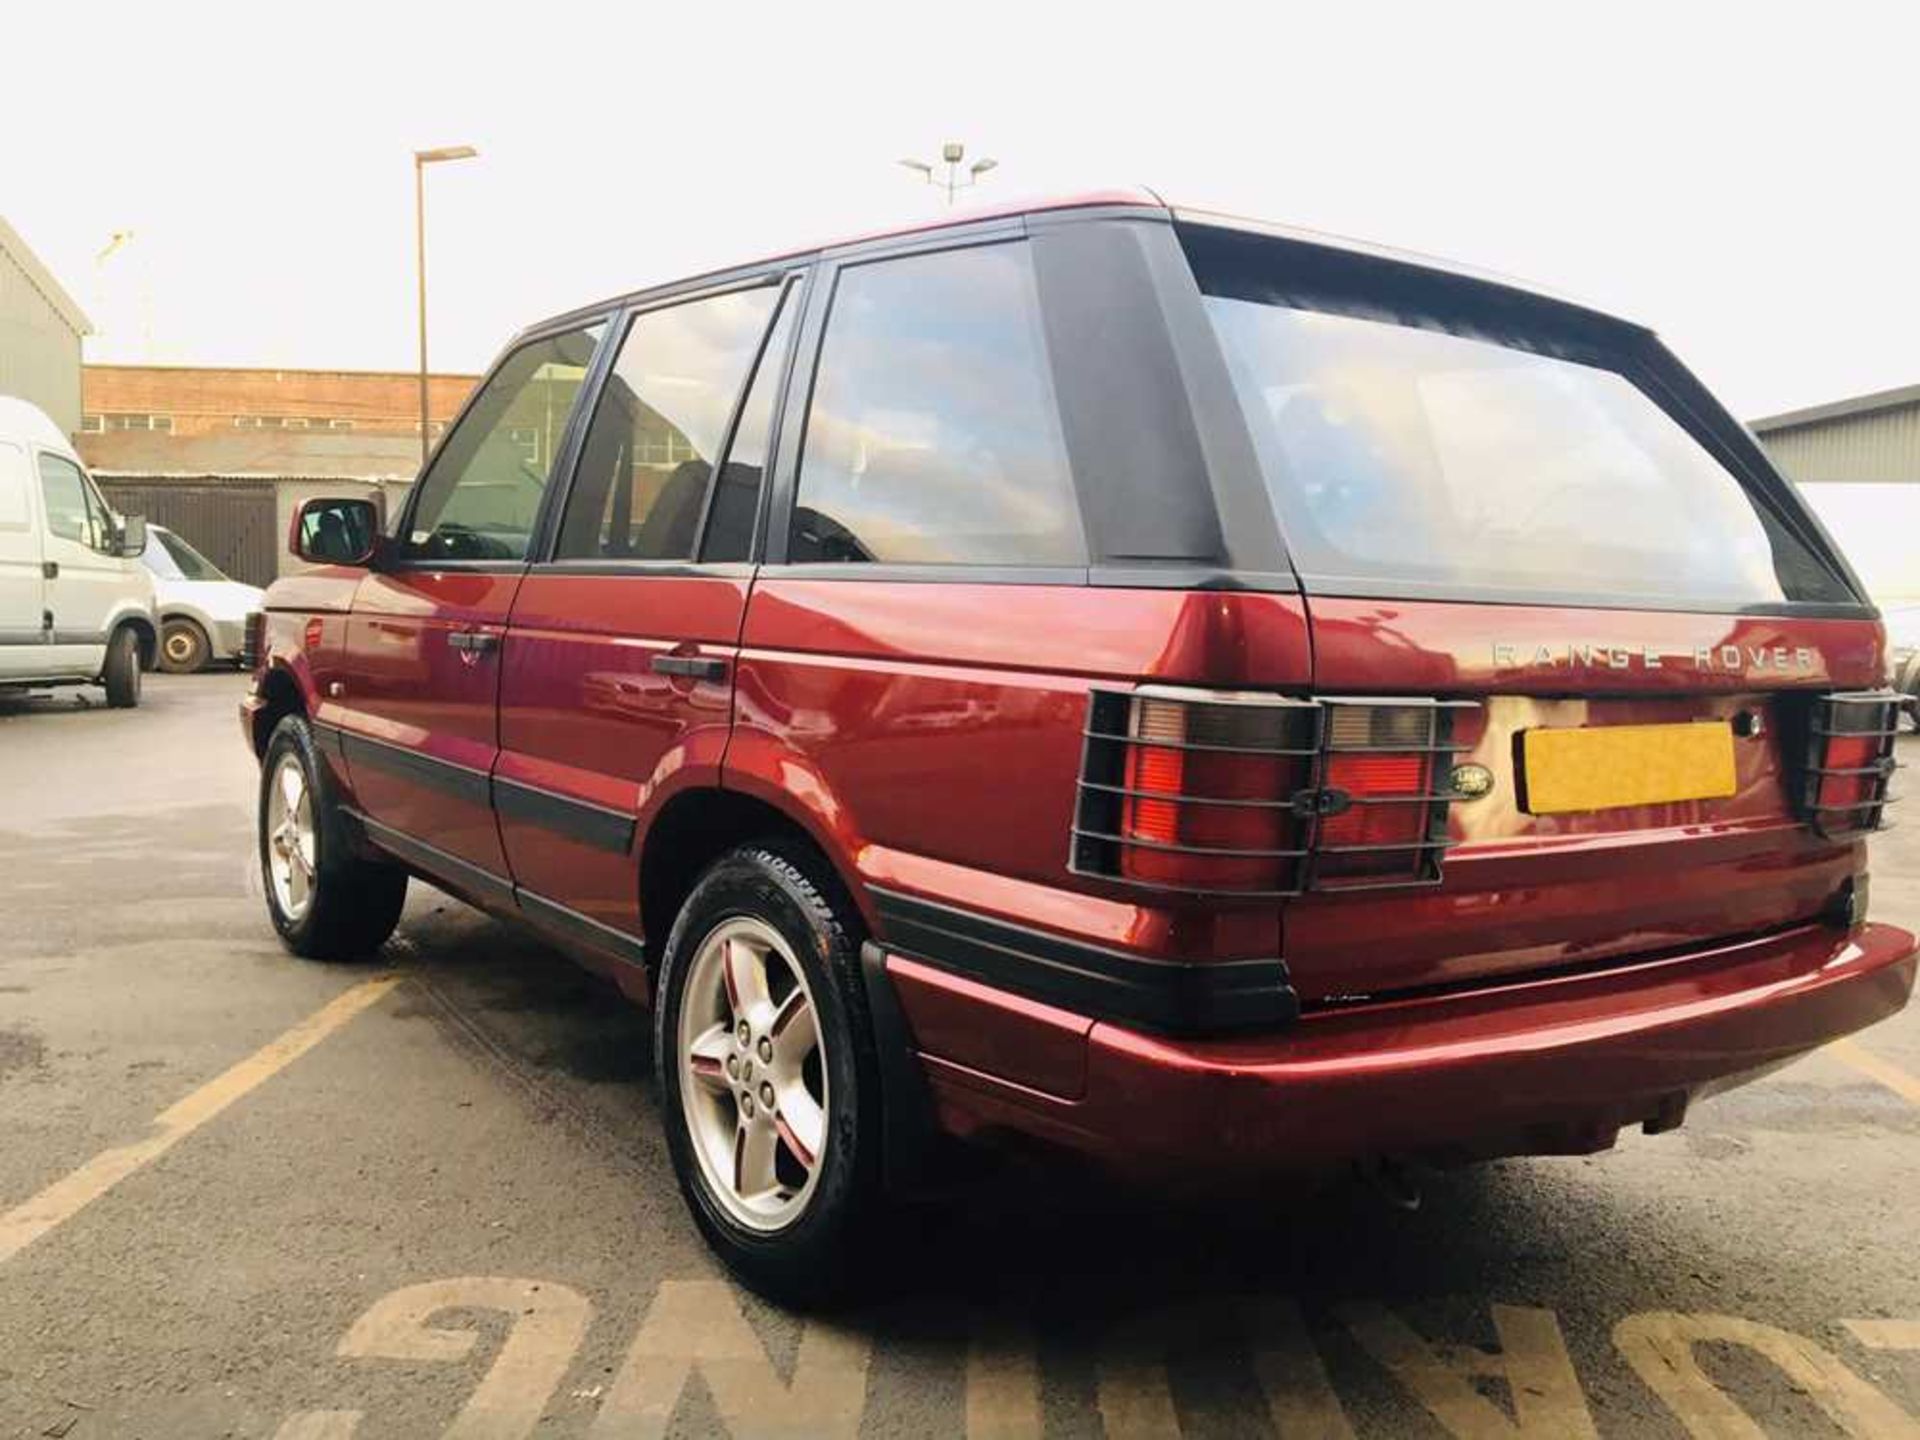 2001 Range Rover 2.5 TD Bordeaux One of just 200 UK-supplied limited edition 'Bordeaux' examples - Bild 4 aus 20